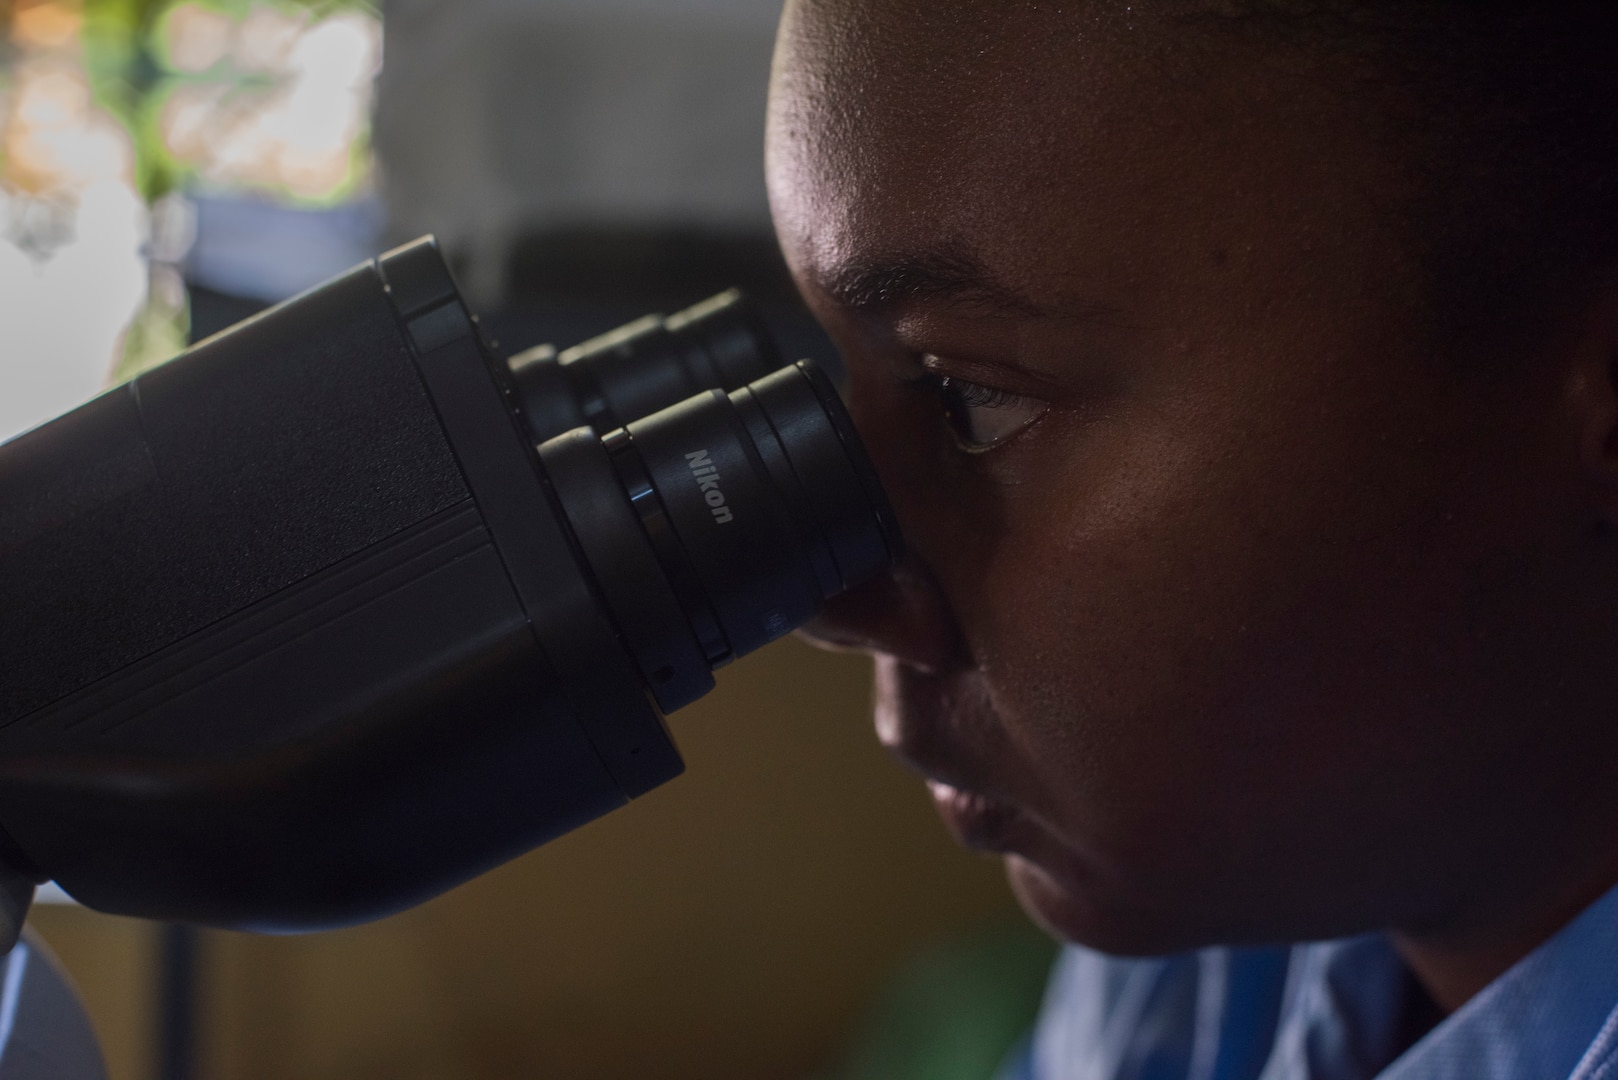 U.S. Army Sgt. Jazmaine Blakeney, Joint Task Force – Bravo Medical Element lab technician, examines tissue samples during an investigation, July 10, 2019, at La Libertad, Honduras. Members of JTF-B were asked by the Honduran Ministry of Health to conduct an investigation into the cause of Leishmaniasis and provide any recommendations that may stop infection. Leishmaniasis is a parasitic disease that is caused by infection with leishmania parasites, which are spread through the bite of sand flies. (U.S. Air Force photo by Staff Sgt. Eric Summers Jr.)